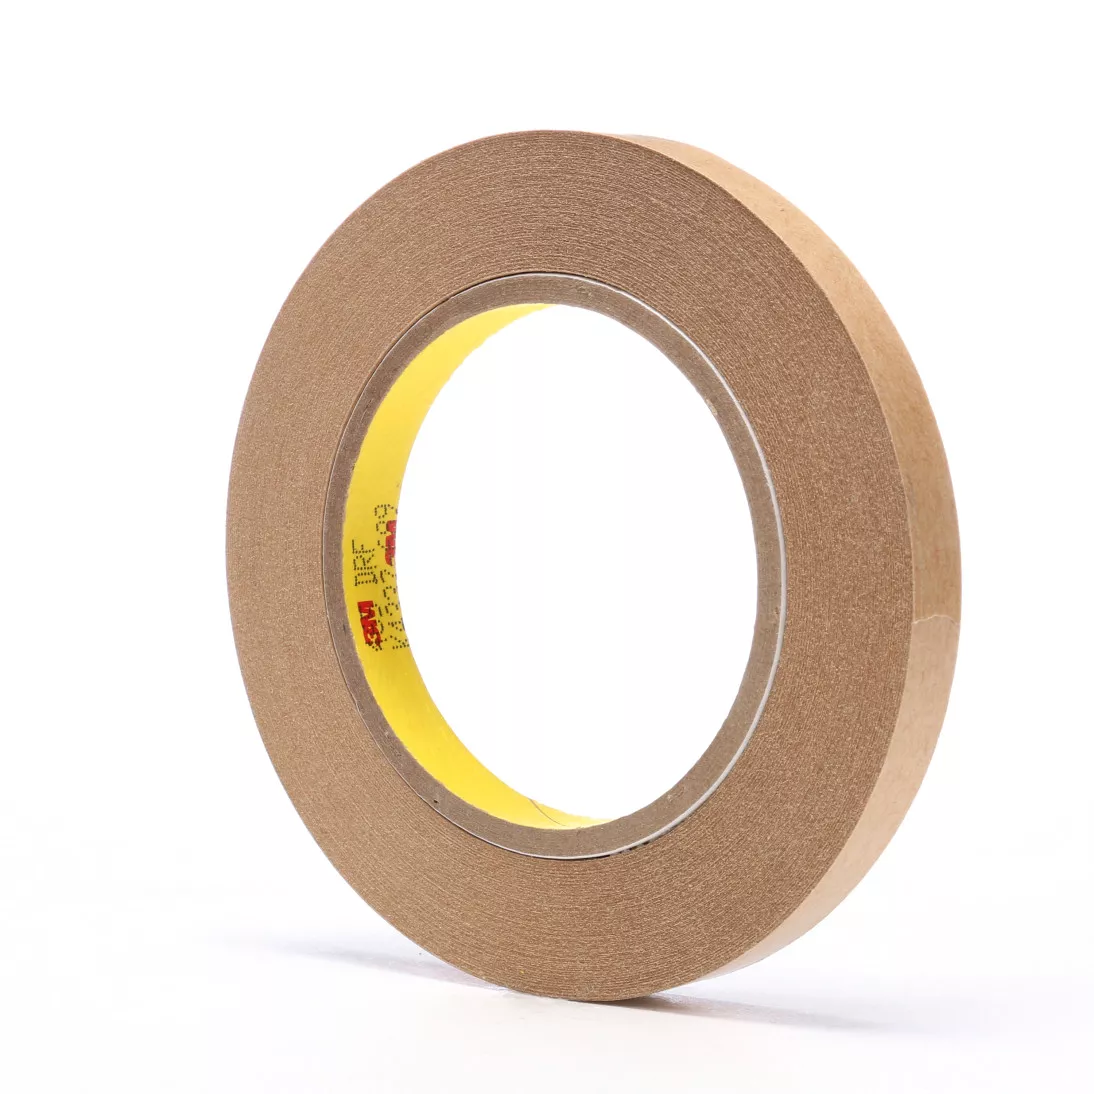 3M™ Adhesive Transfer Tape 465, Clear, 1/2 in x 60 yd, 2 mil, 72 rolls
per case